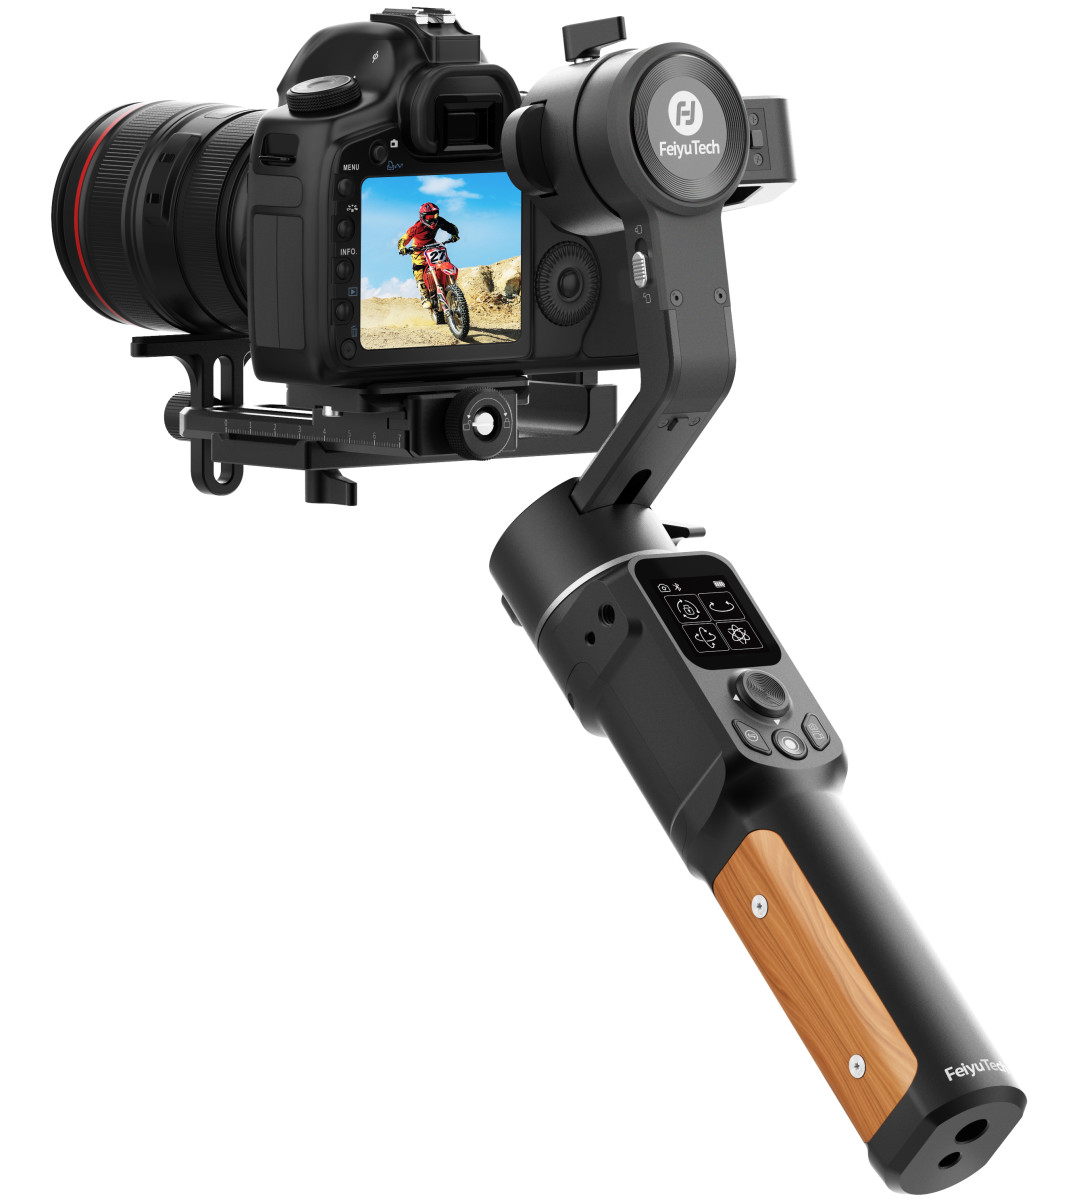 Feiyutech's AK2000C Is A Low Cost Professional Gimbal For Digital Cameras